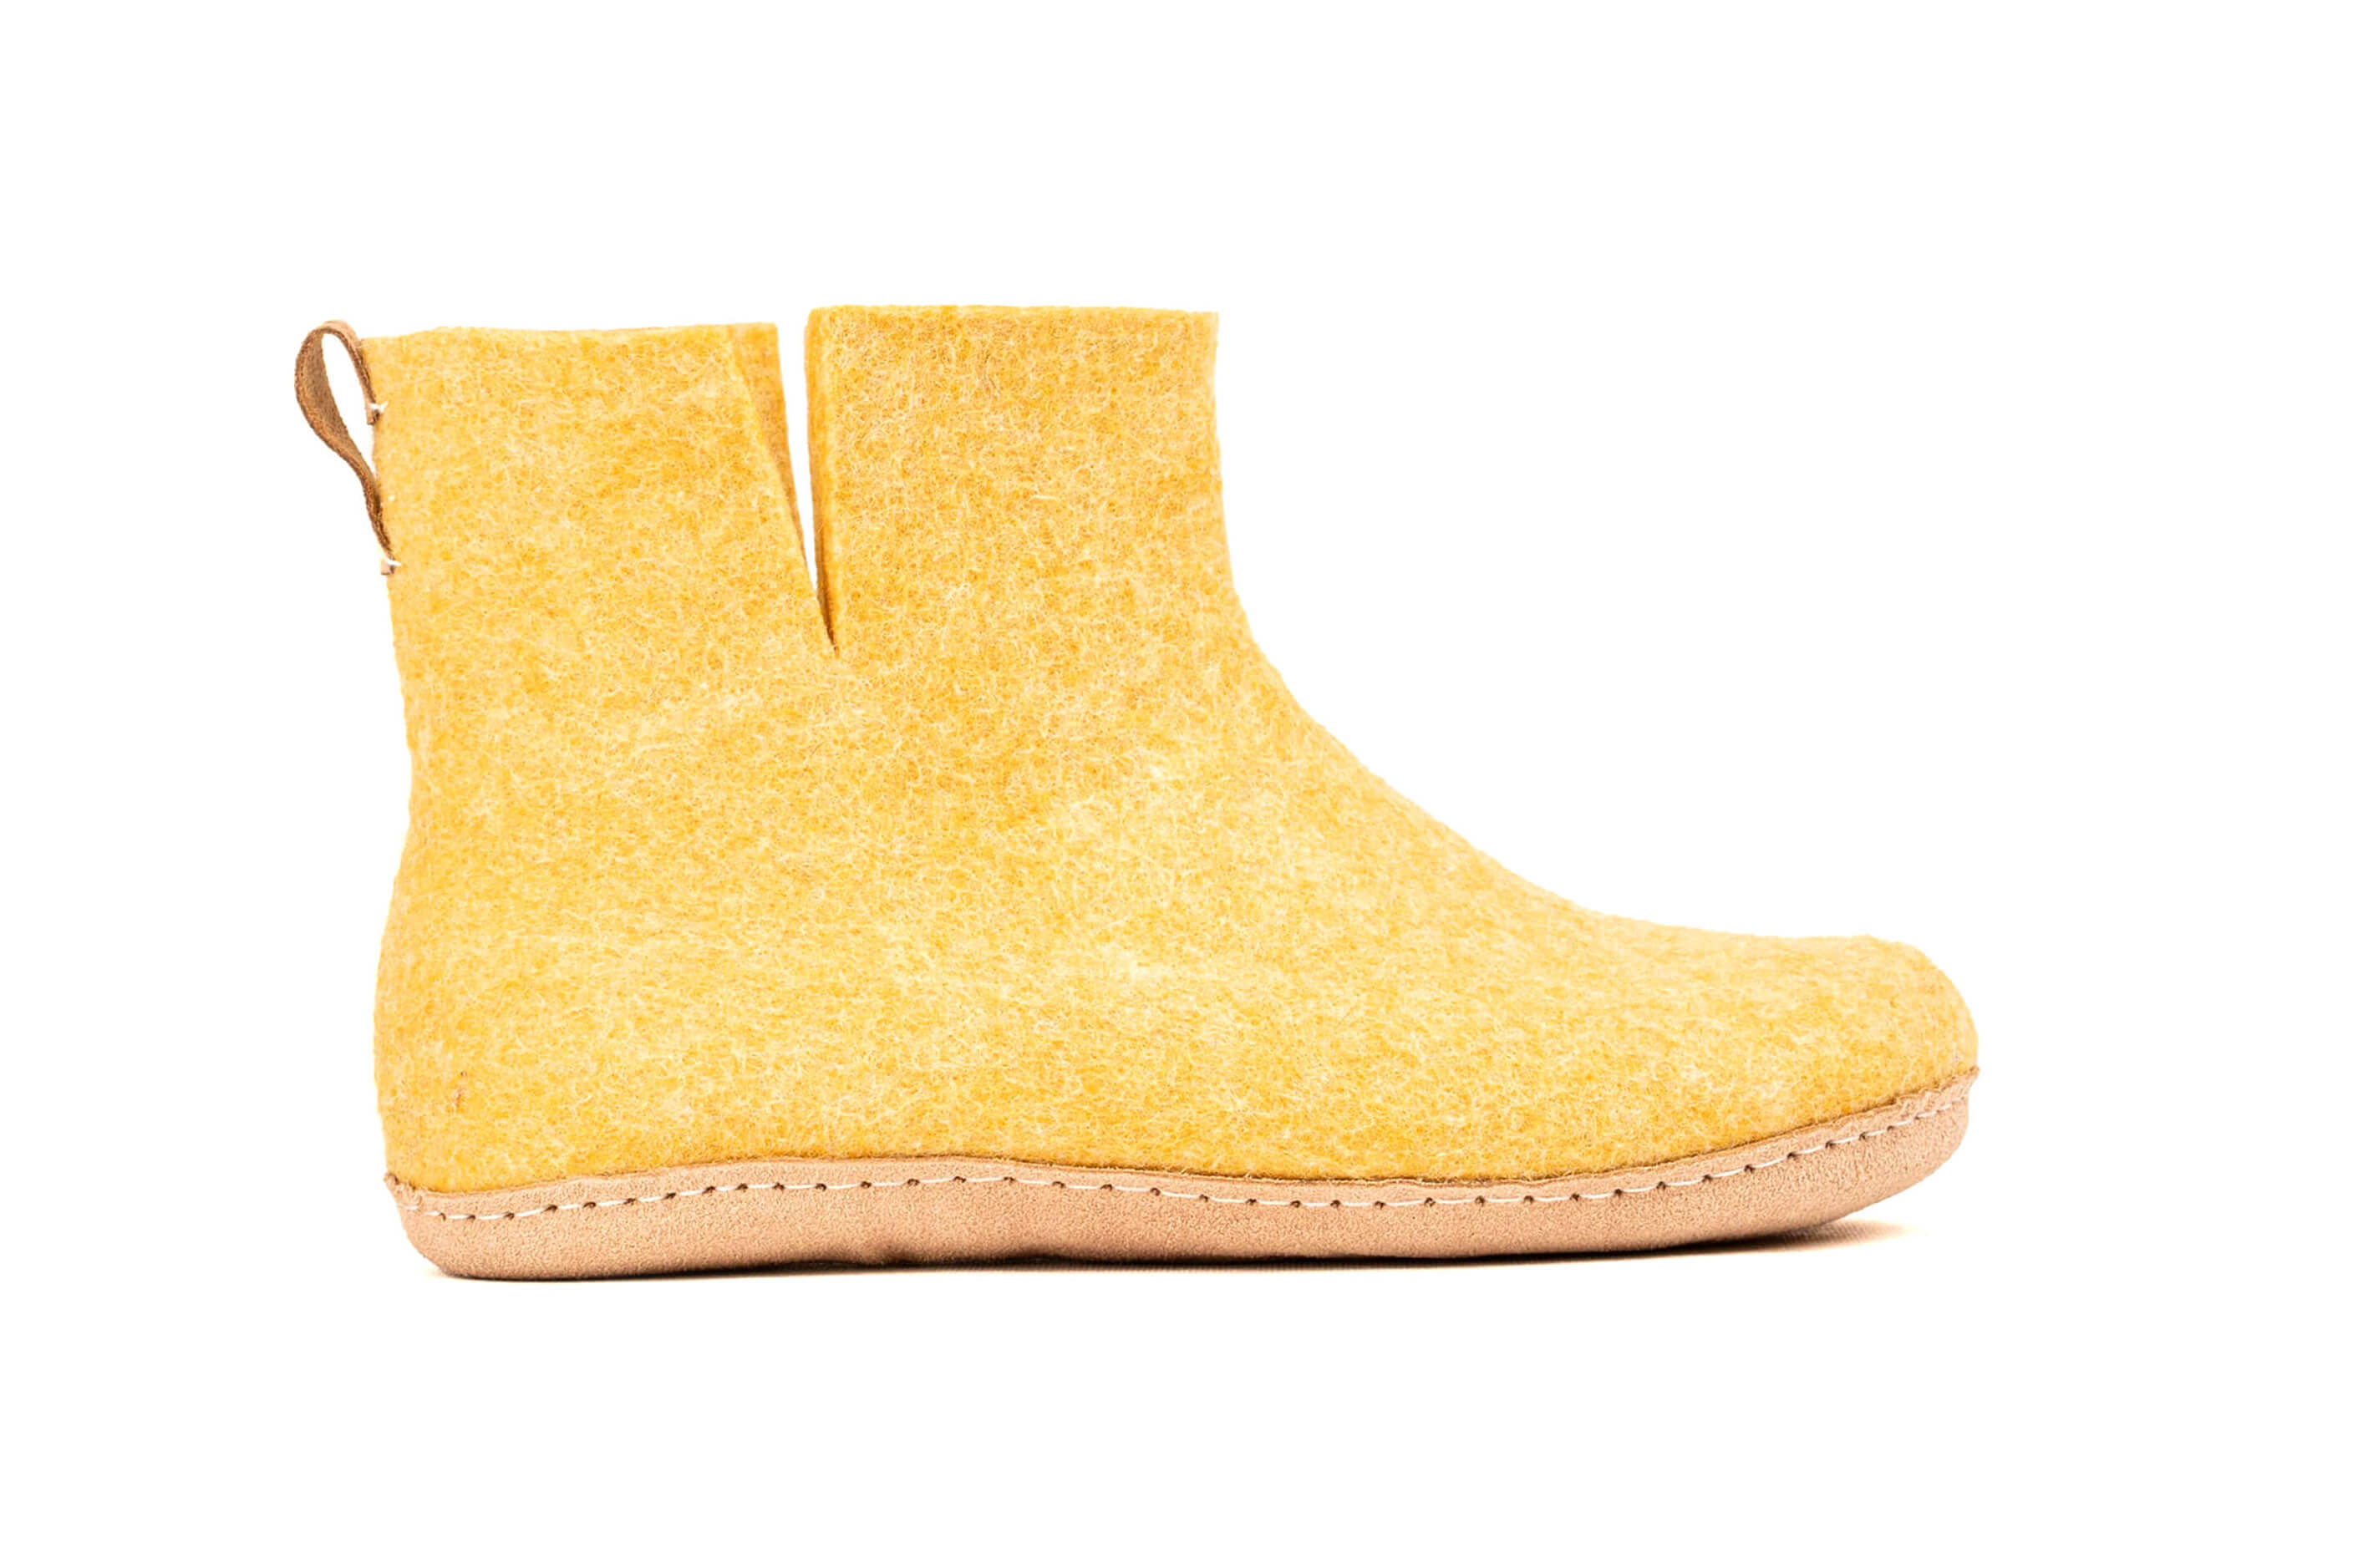 Indoor Boots With Leather Sole - Mustard